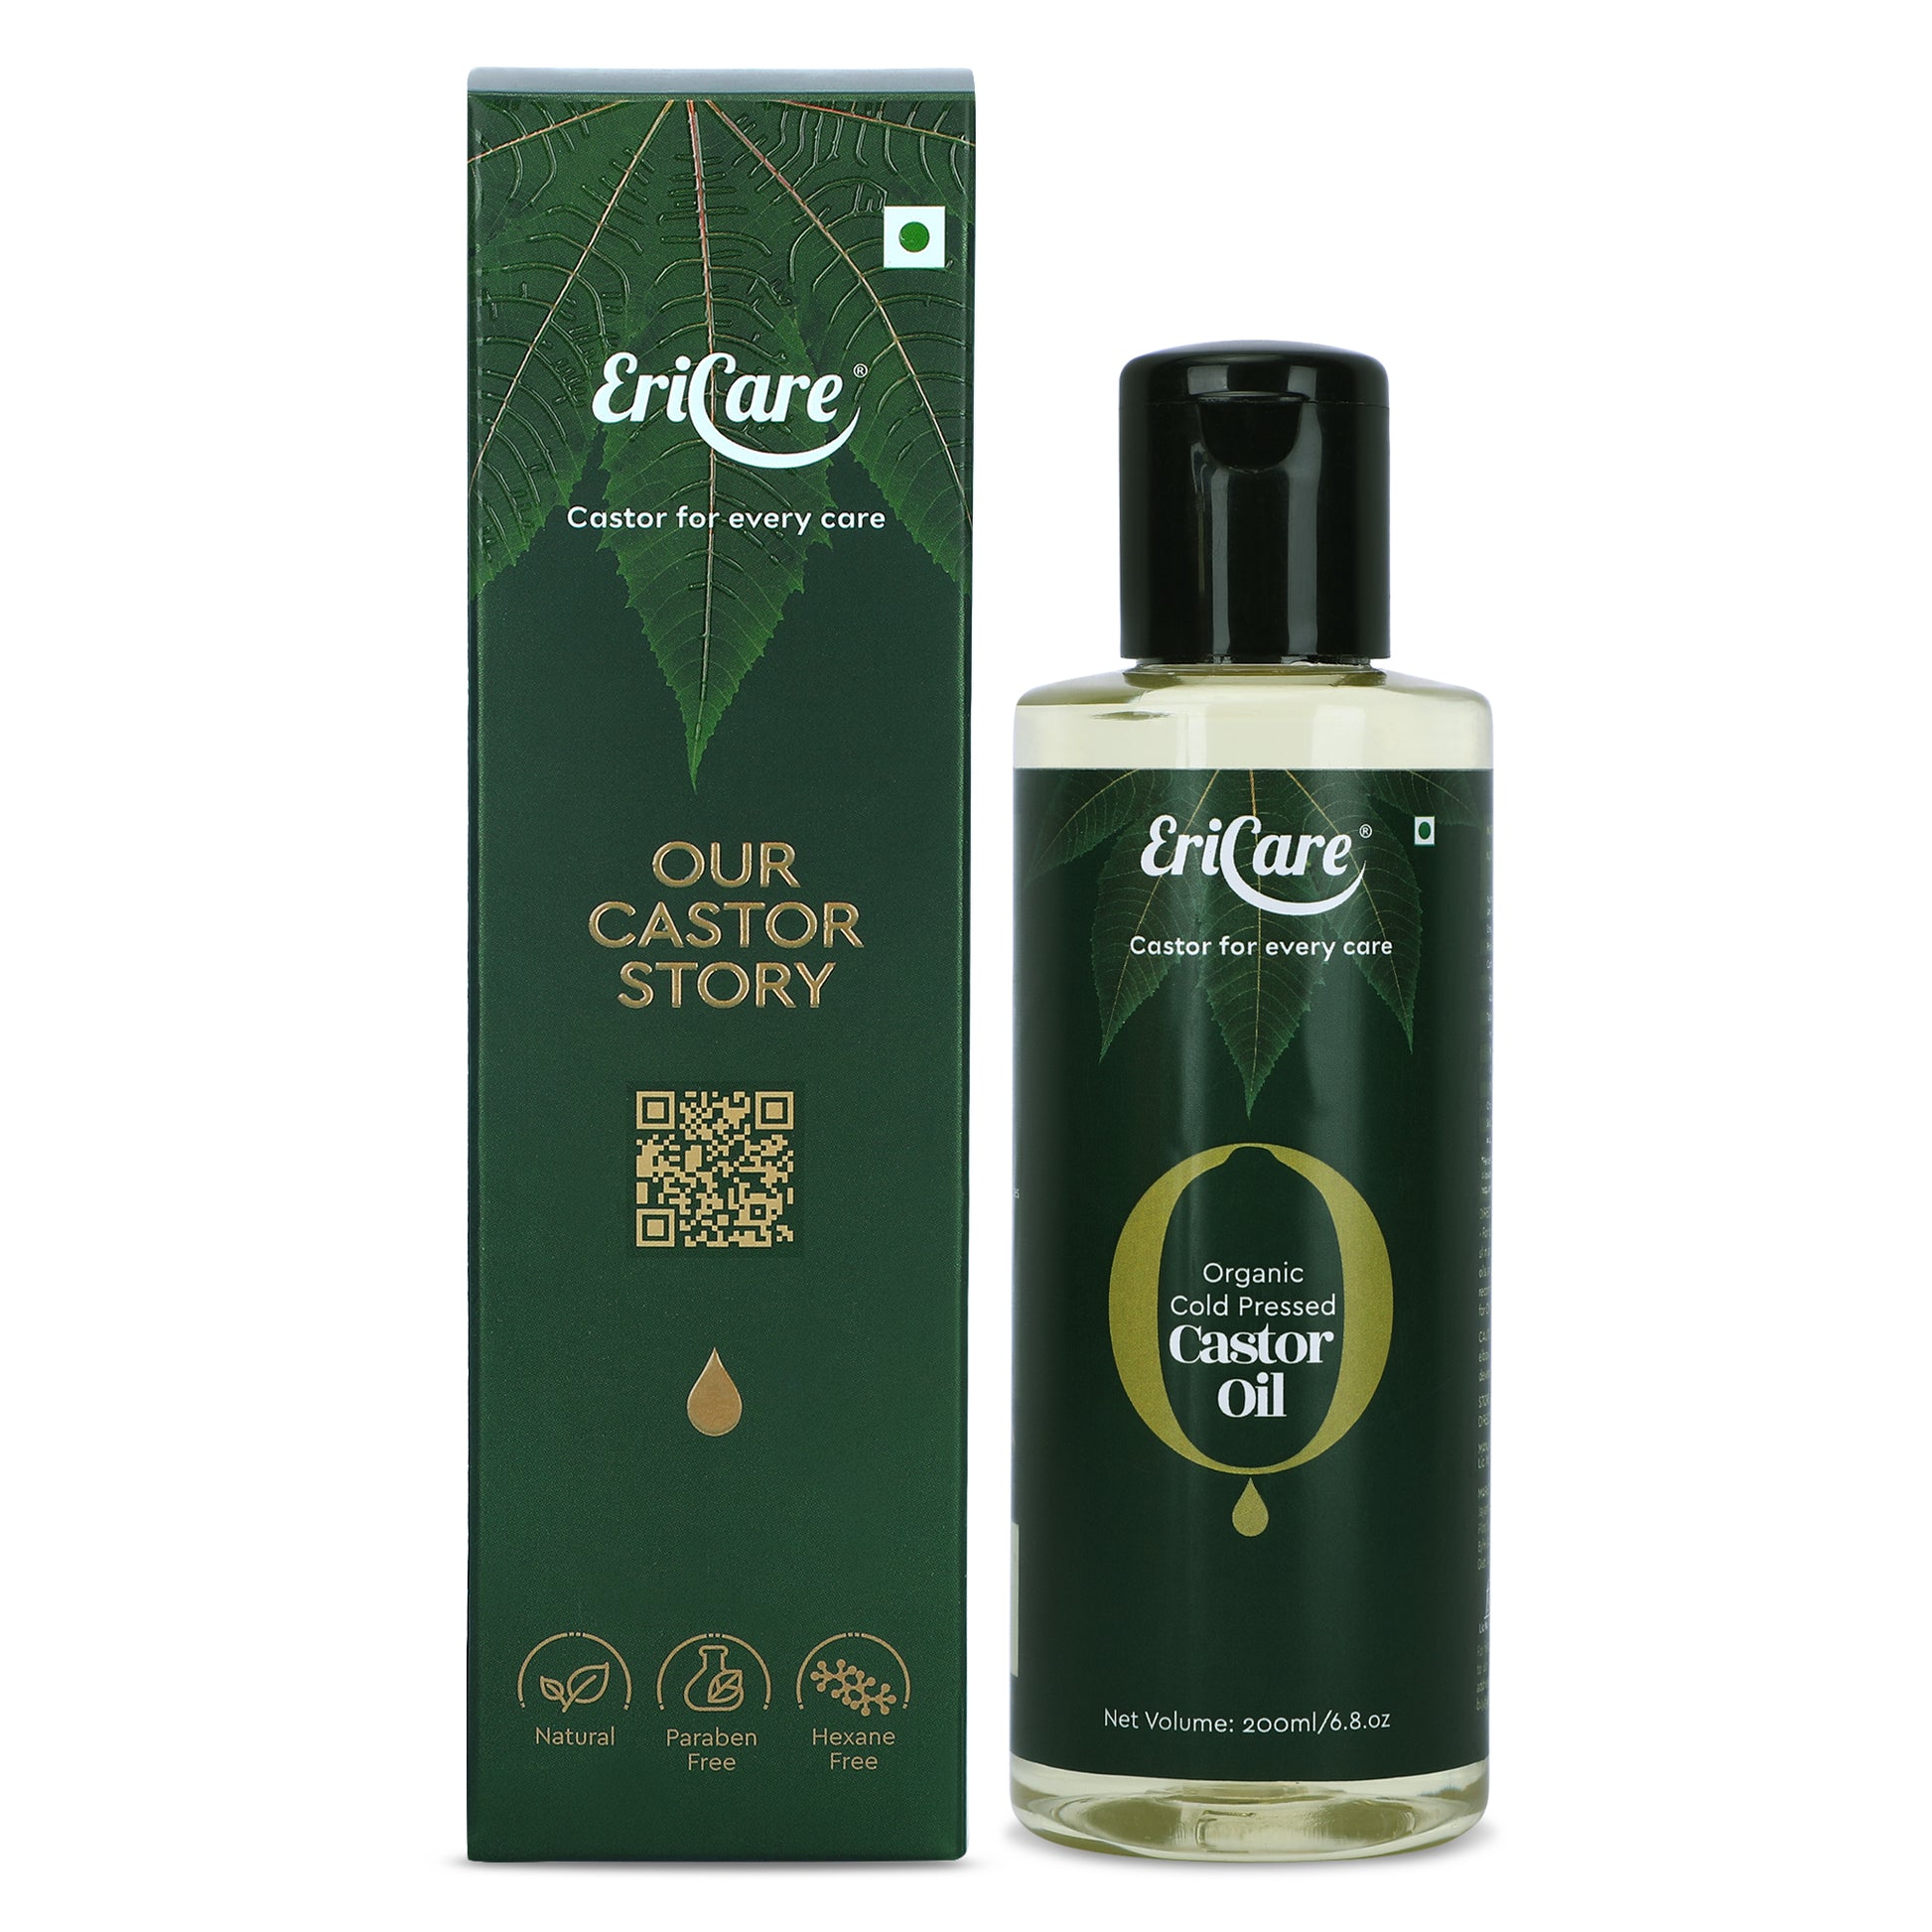 EriCare Organic Castor Oil brand bottle with its outer cover that displays Castor Story of EriCare BrandCertified hexane-free 